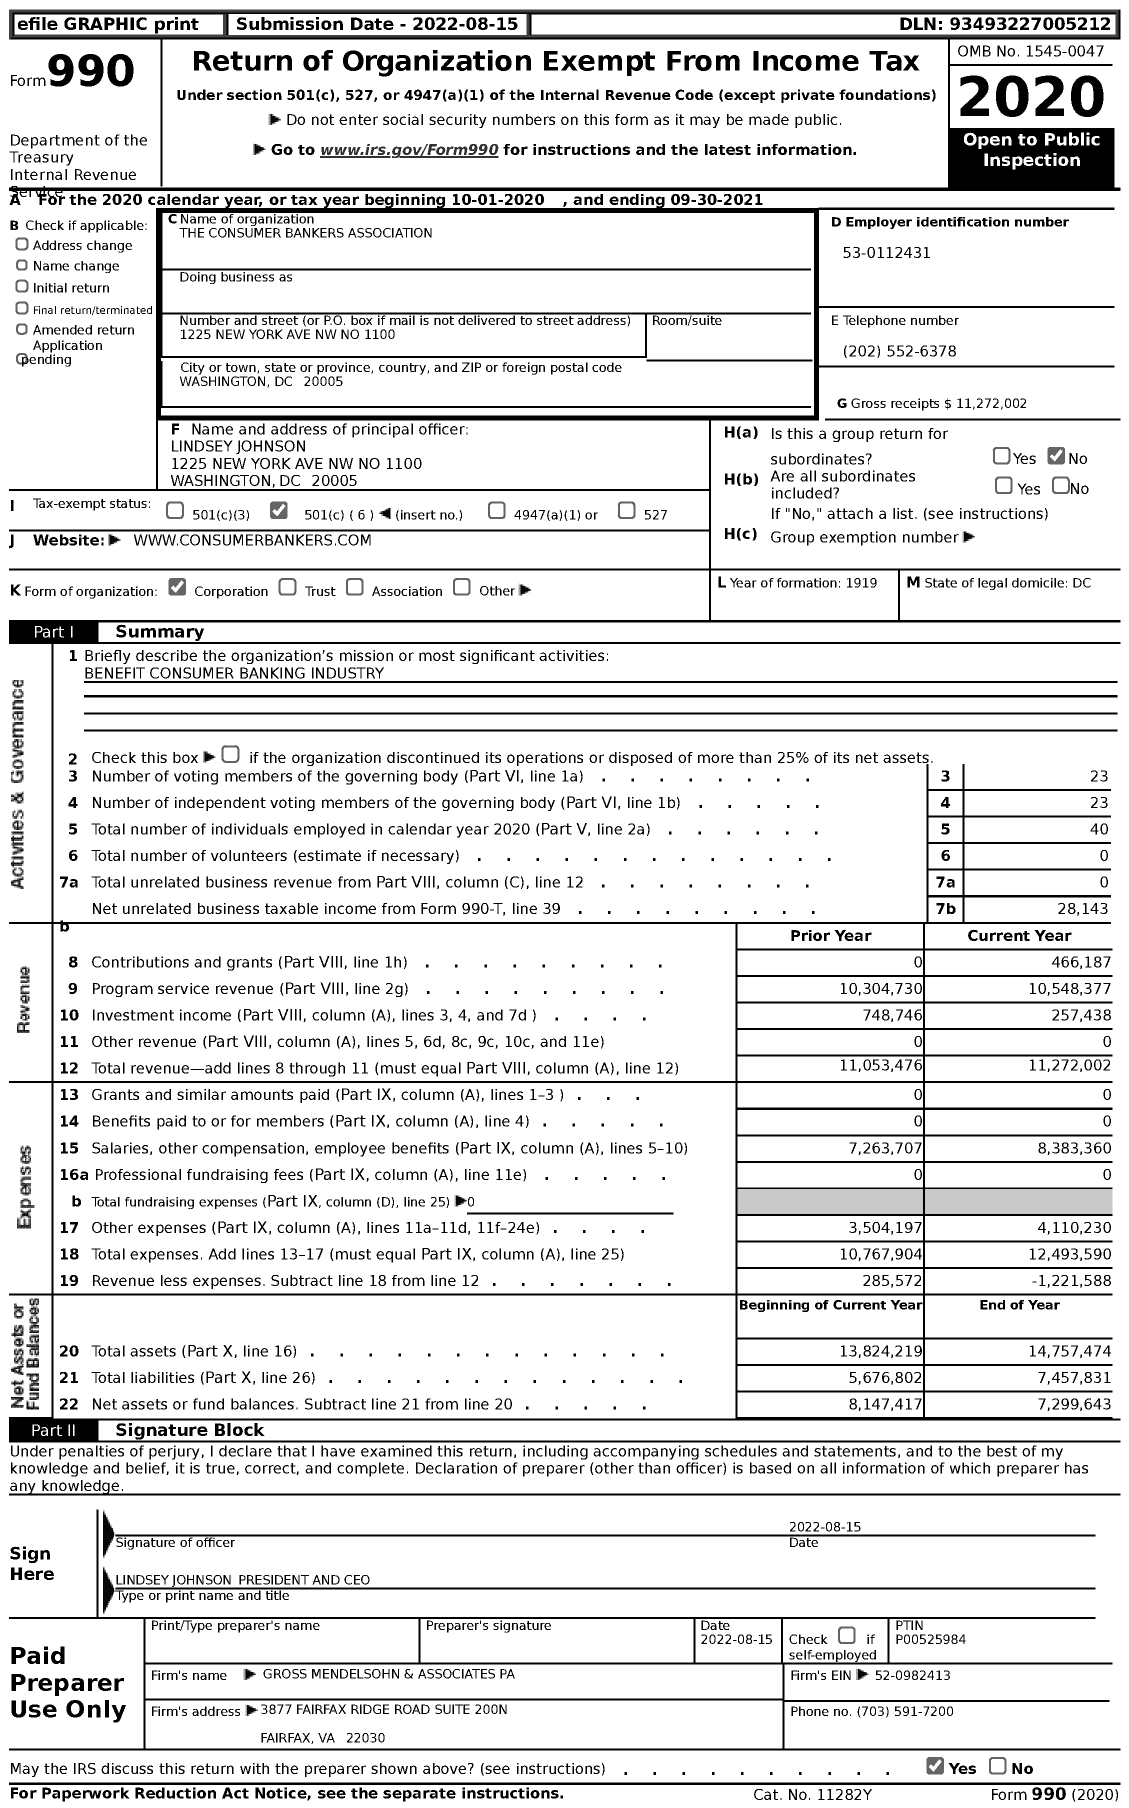 Image of first page of 2020 Form 990 for The Consumer Bankers Association (CBA)